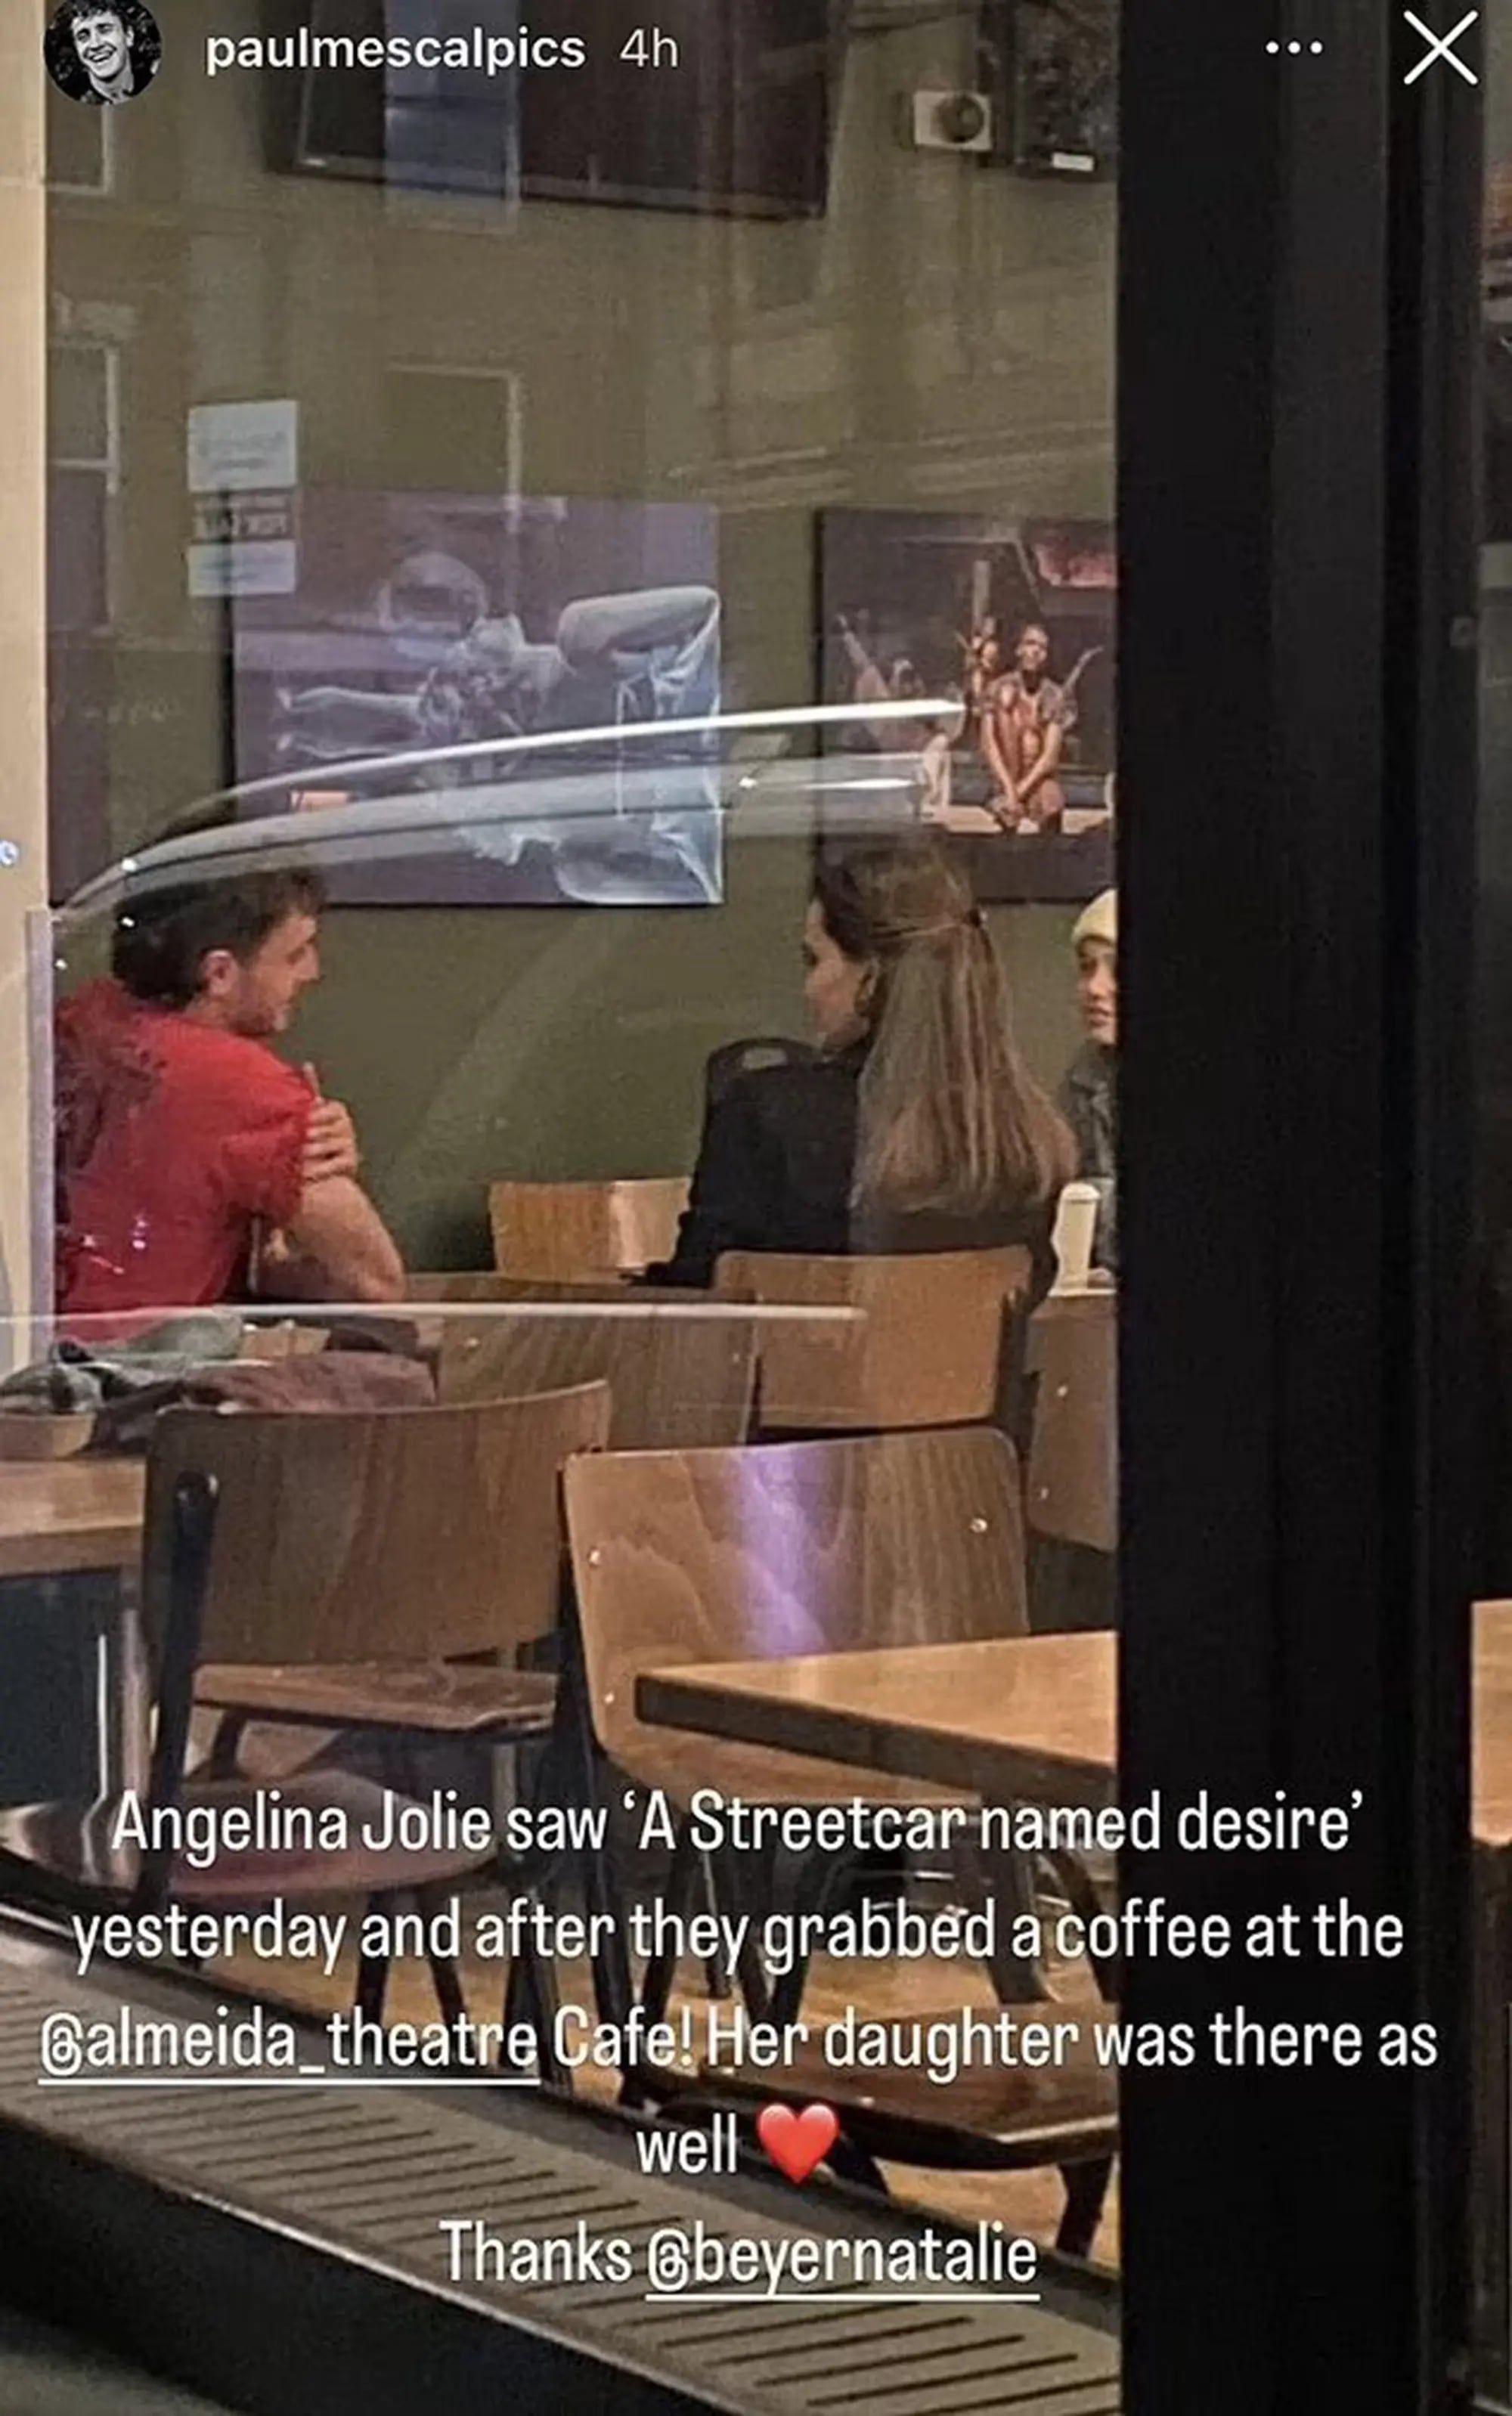 A fan account on Instagram shared a photograph of Angelina and Paul having coffee together.